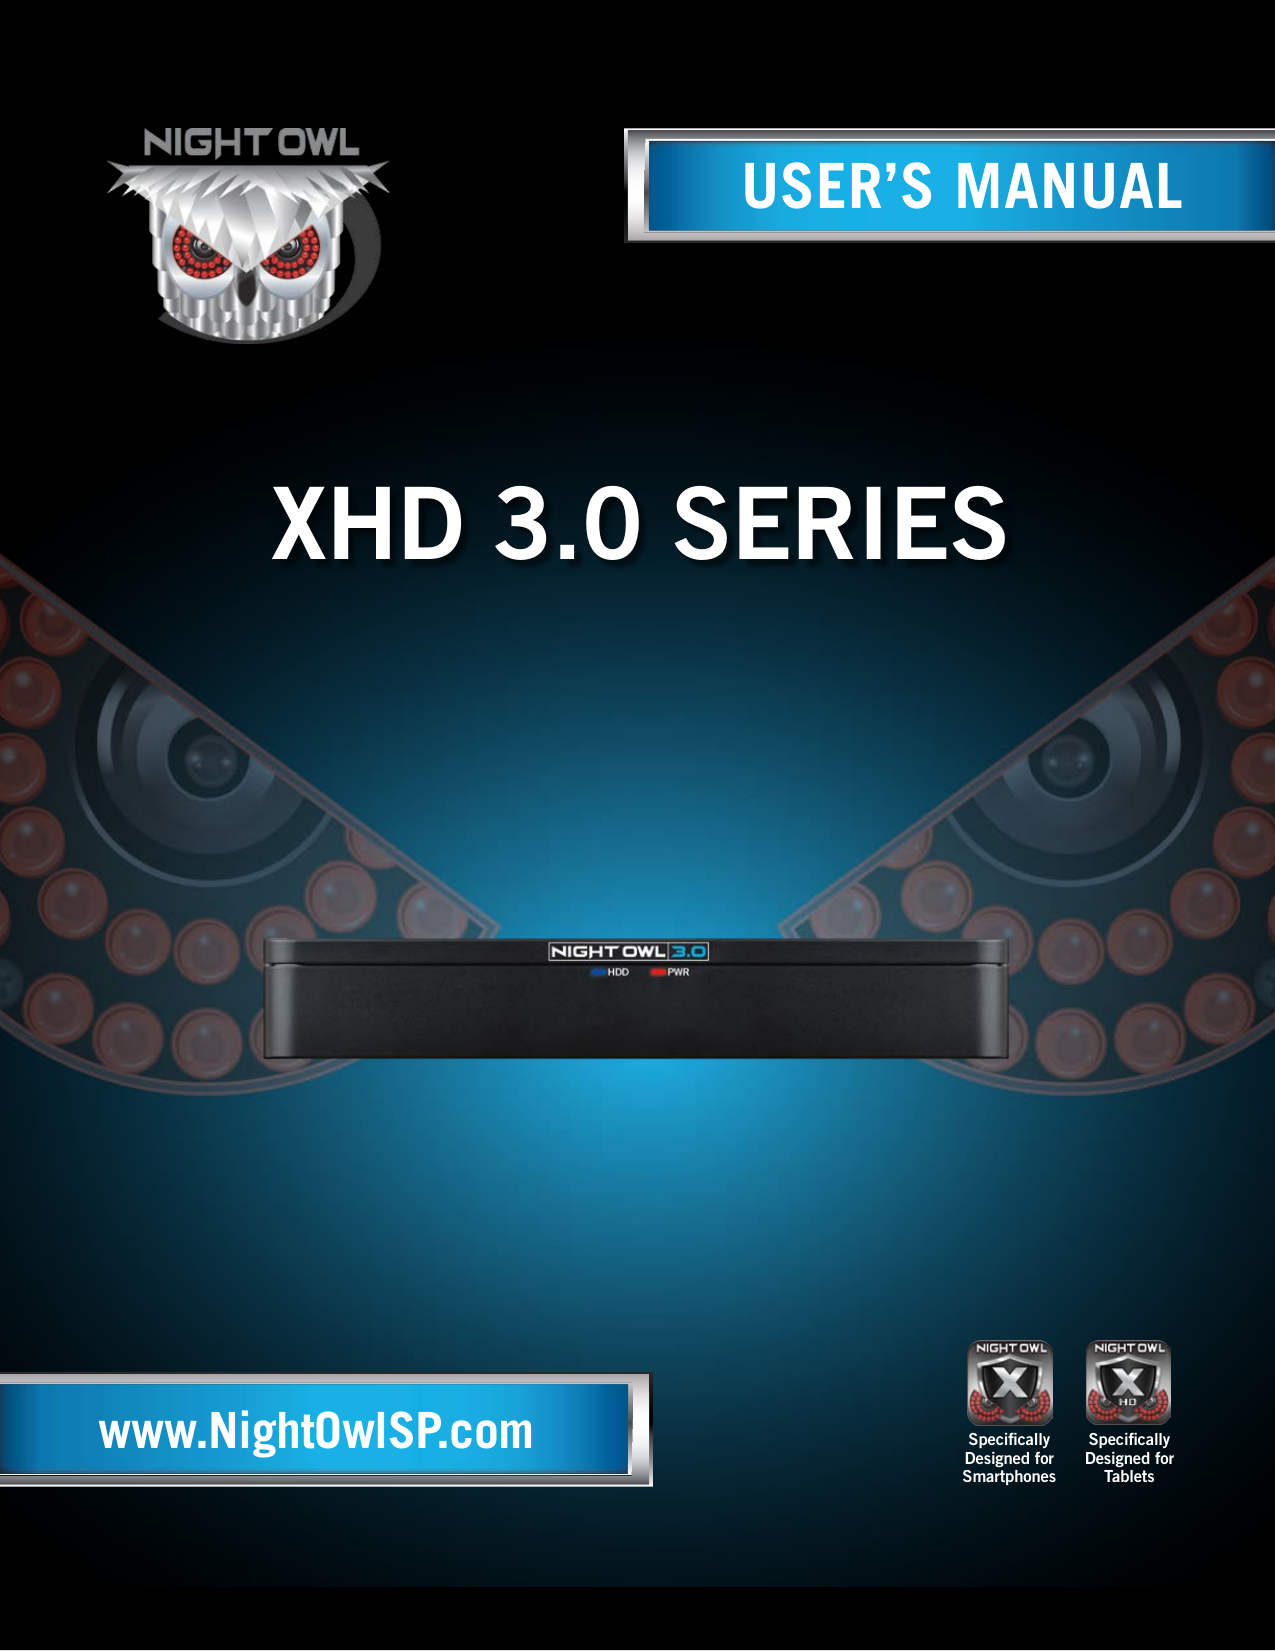 night owl x app not connecting to dvr